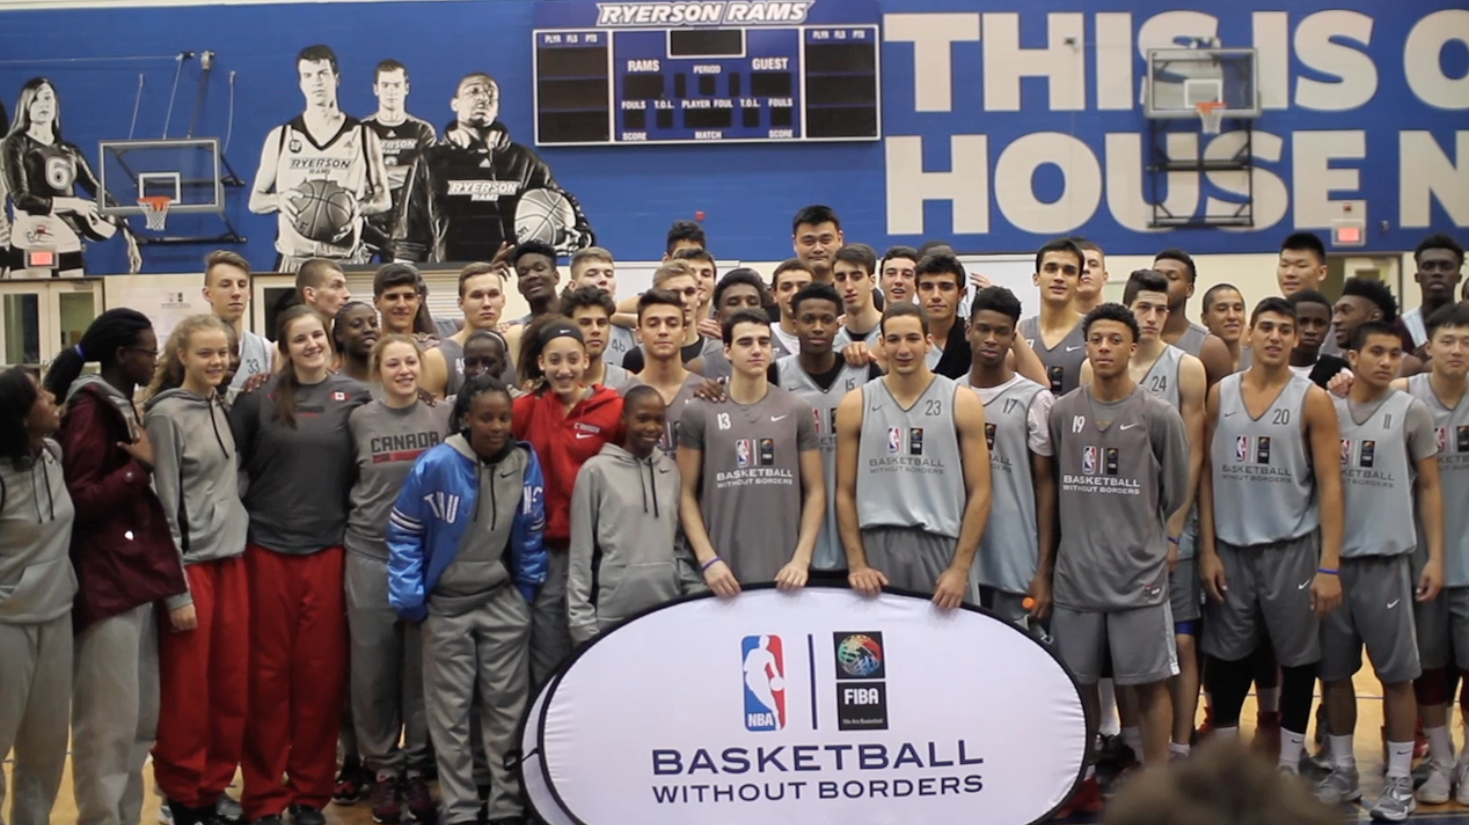 Frank Ntilikina, DeAndre Ayton, Shai Gilgeous-Alexander, and others at the 2016 Basketball Without Borders Camp in Toronto, Canada.